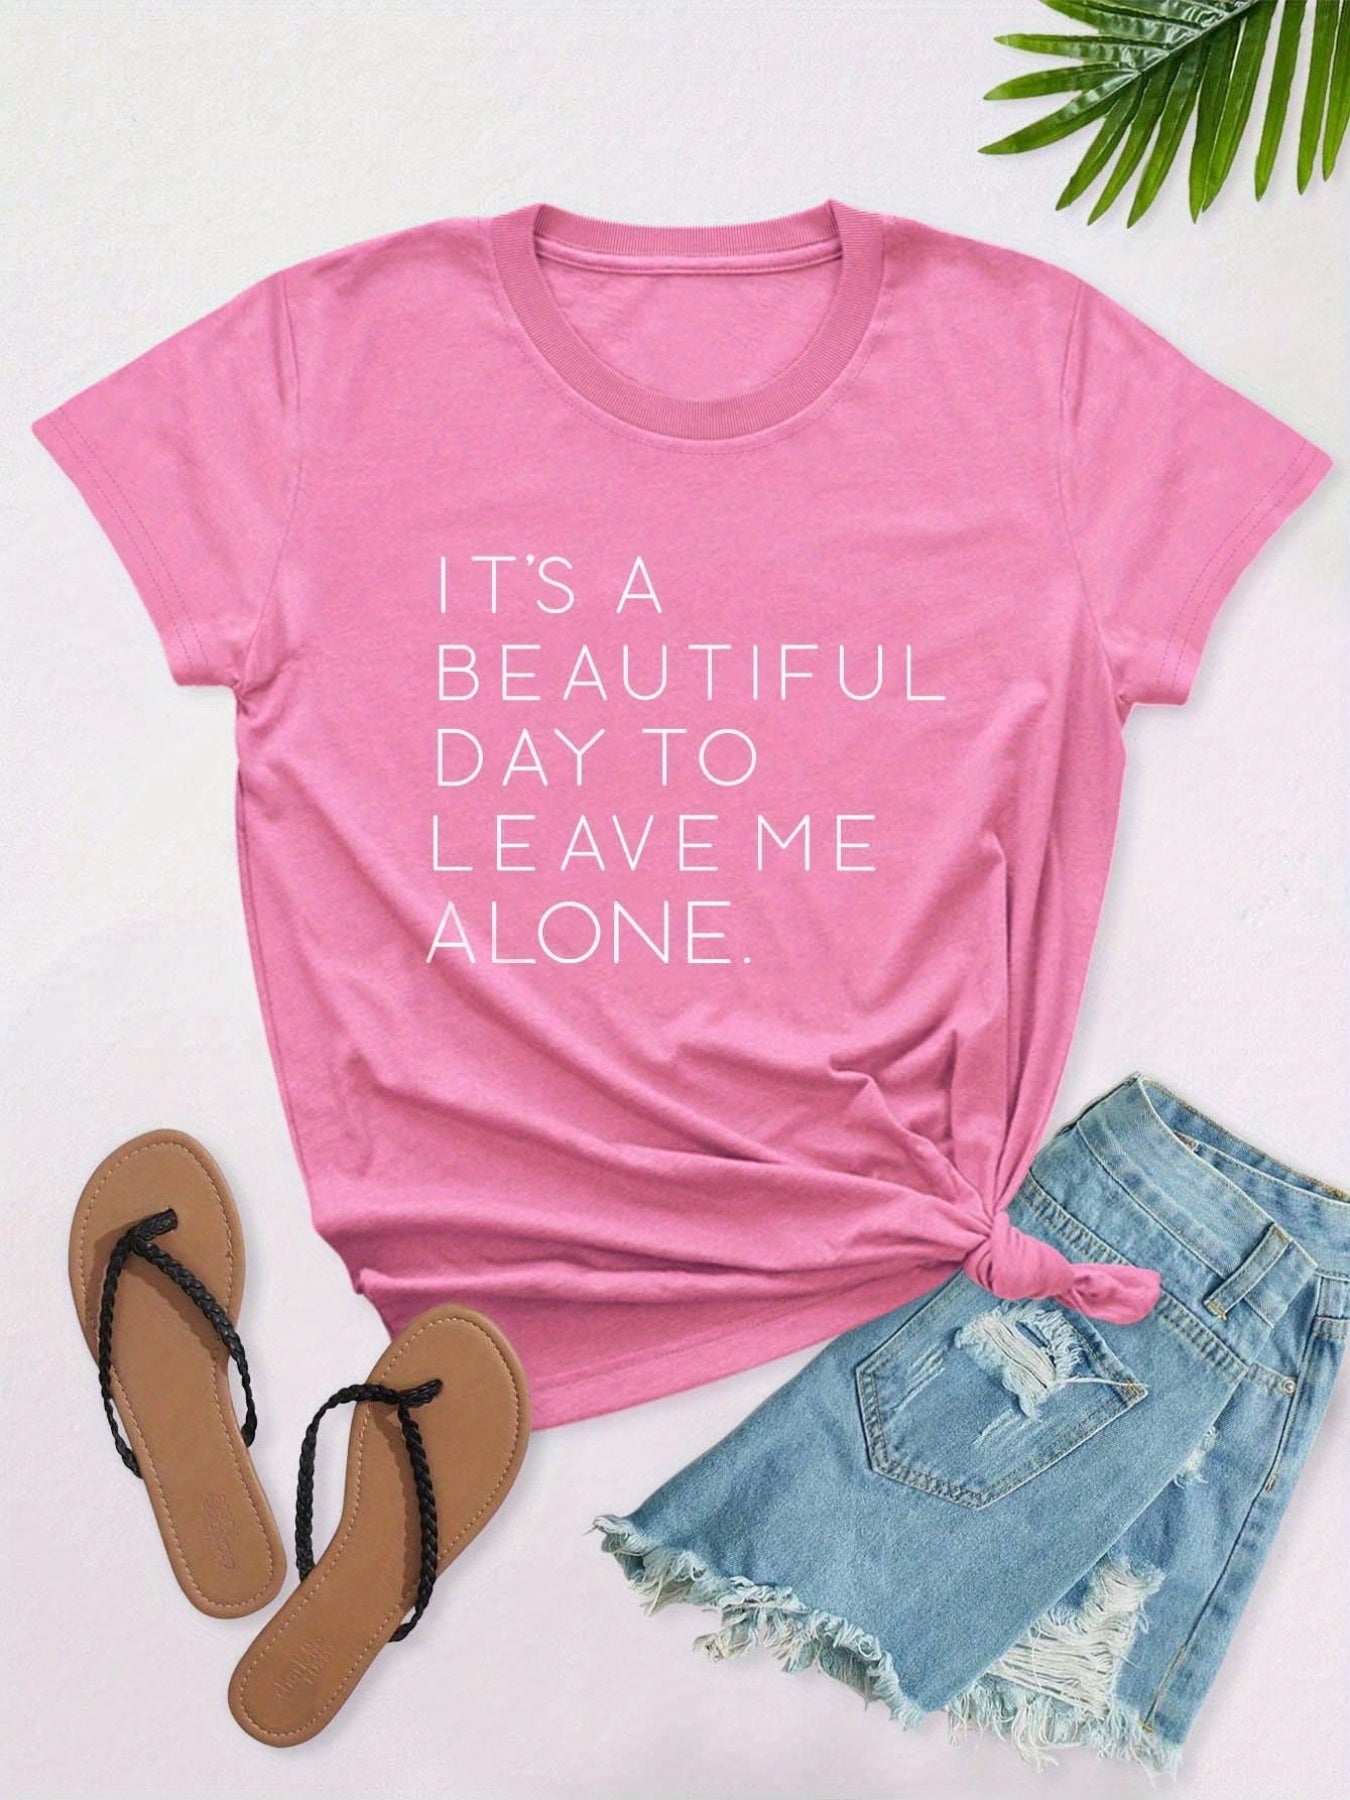 vlovelaw  Casual Leave Me Alone Print Crew Neck T-shirt, Loose Short Sleeve Fashion Summer T-Shirts Tops, Women's Clothing